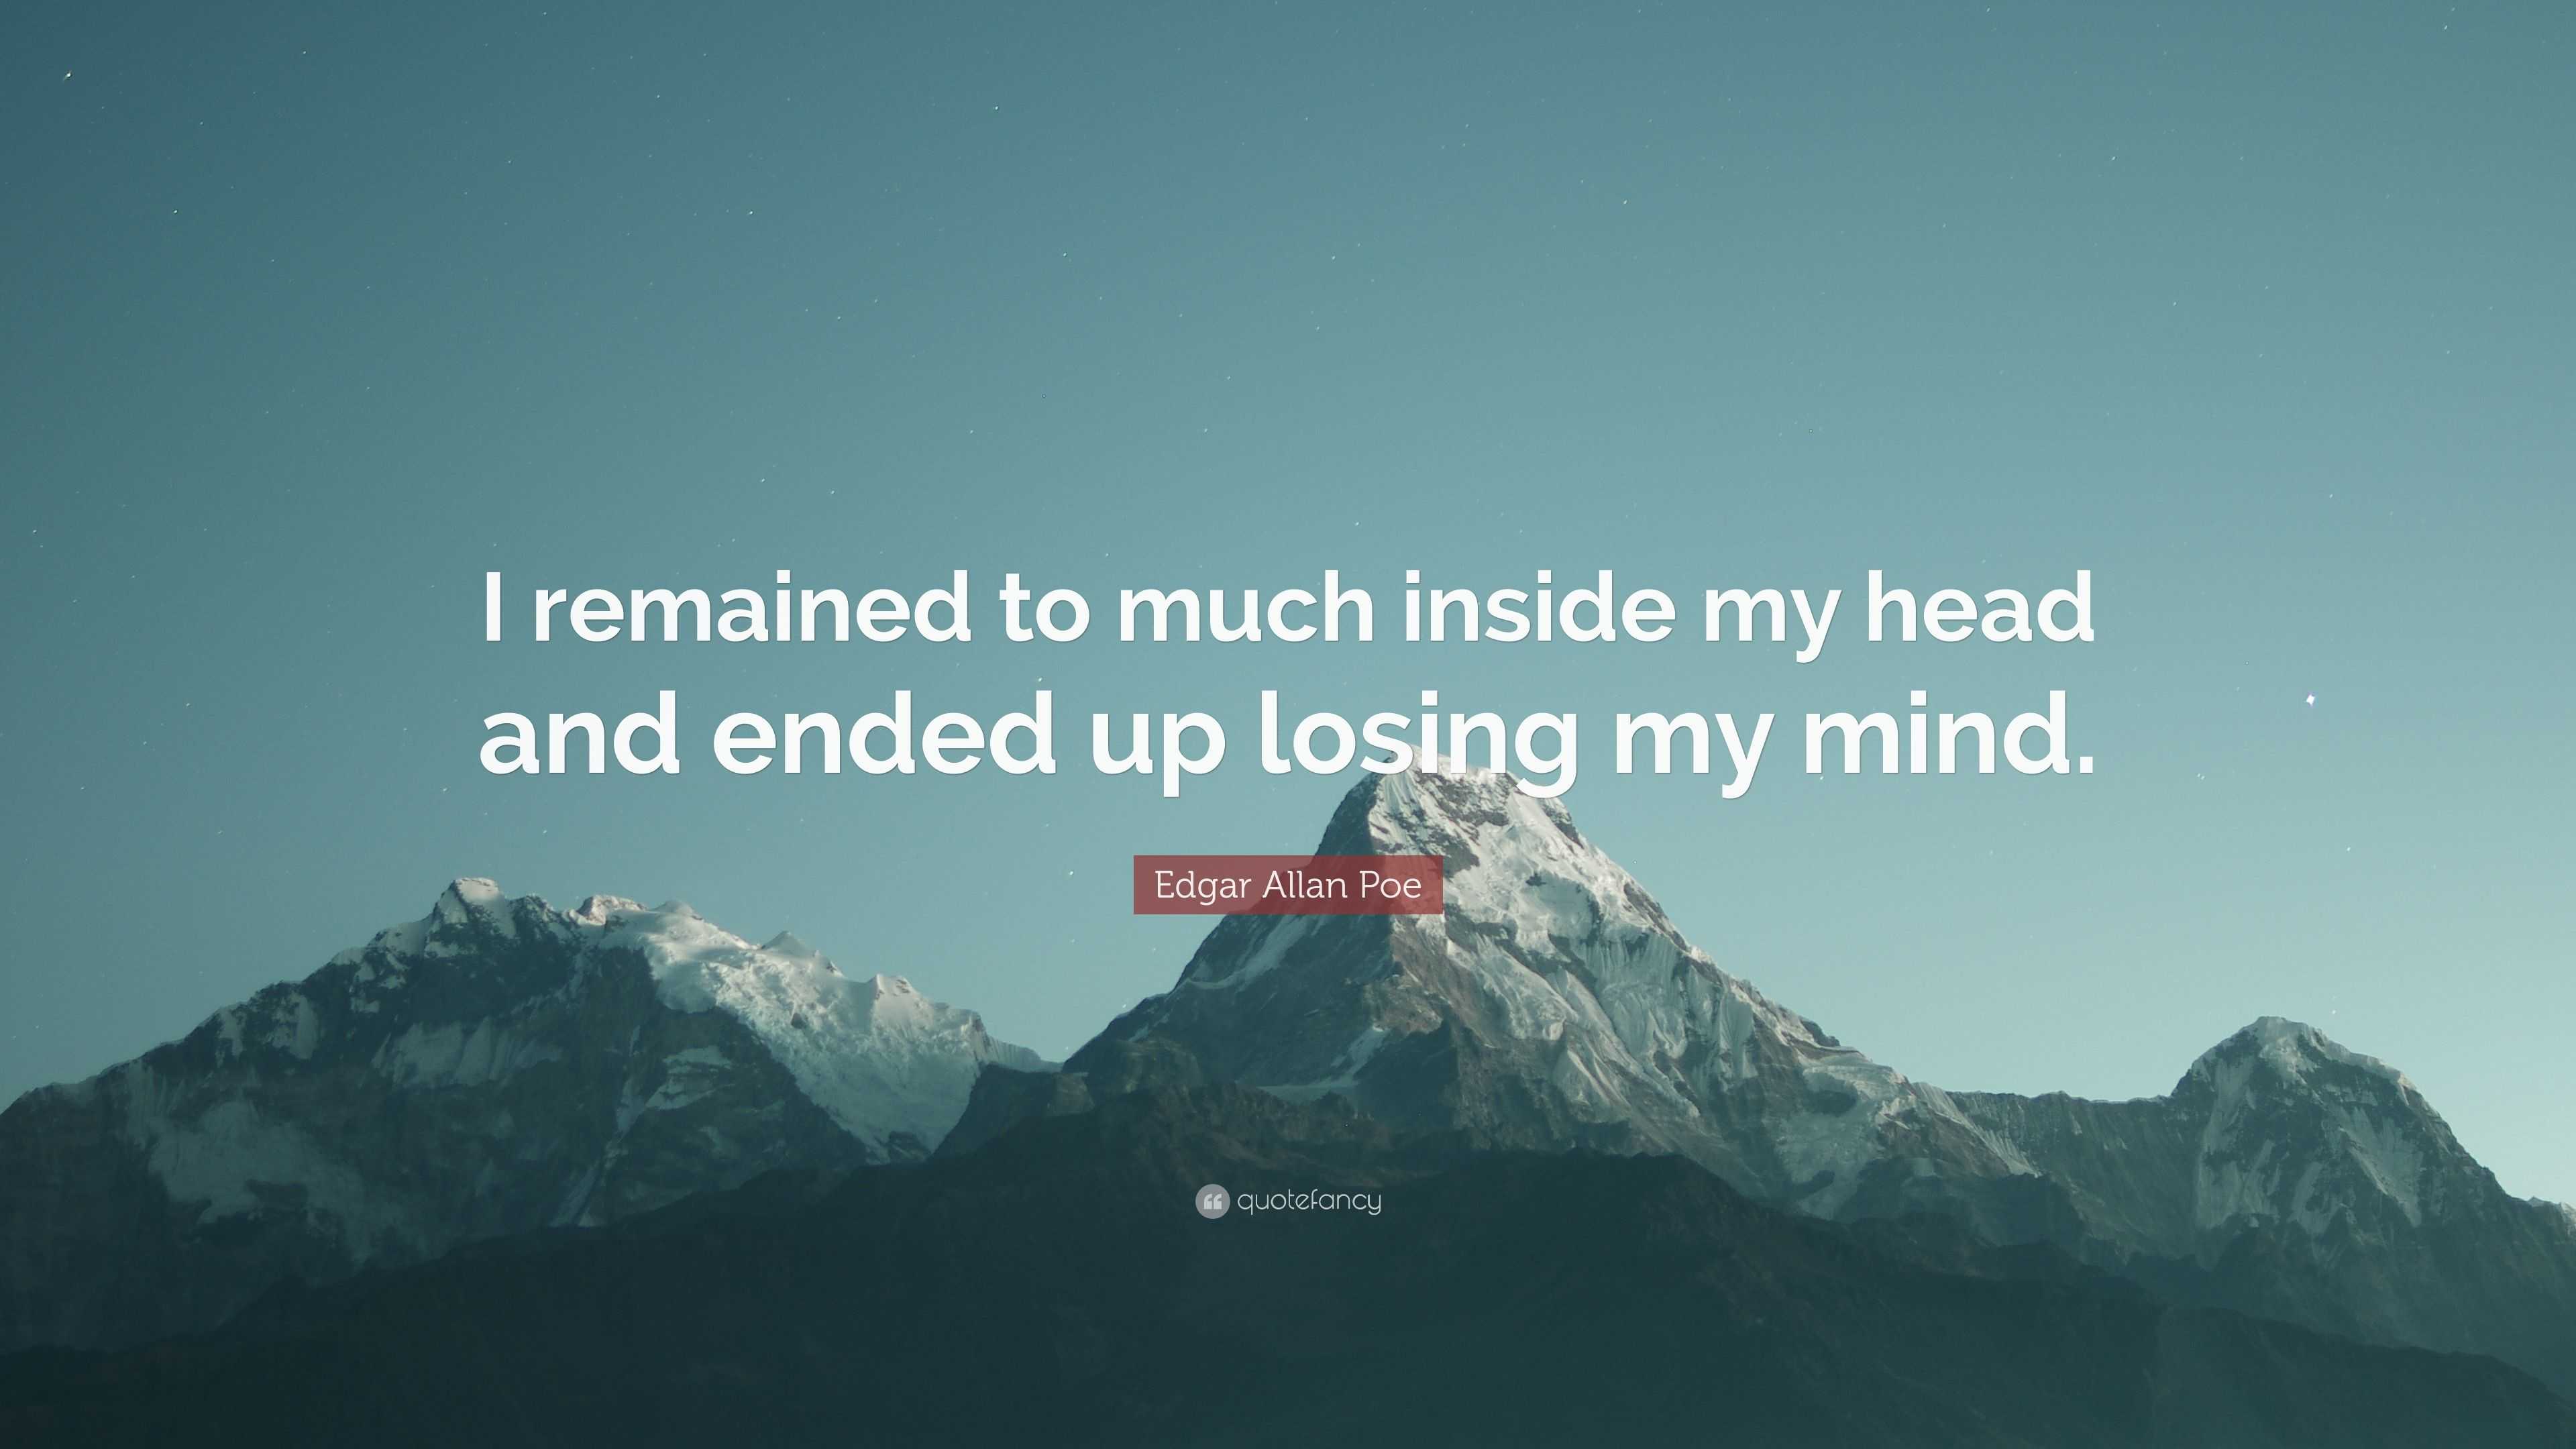 Edgar Allan Poe Quote: “I remained to much inside my head and ended up ...